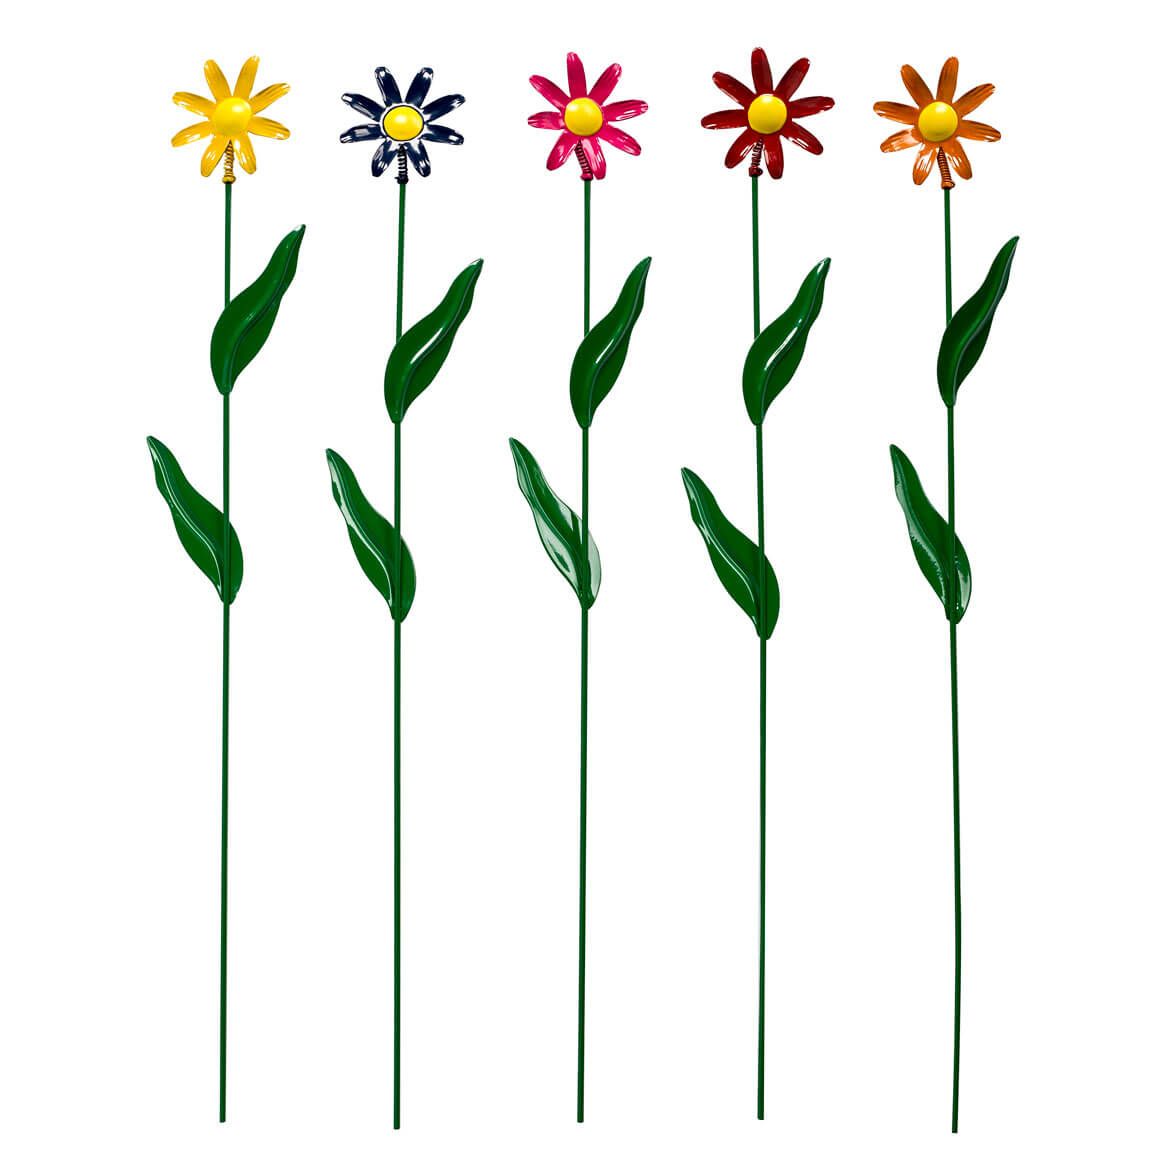 Metal Daisy Stakes Set of 5 by Fox River Creations™ + '-' + 359372